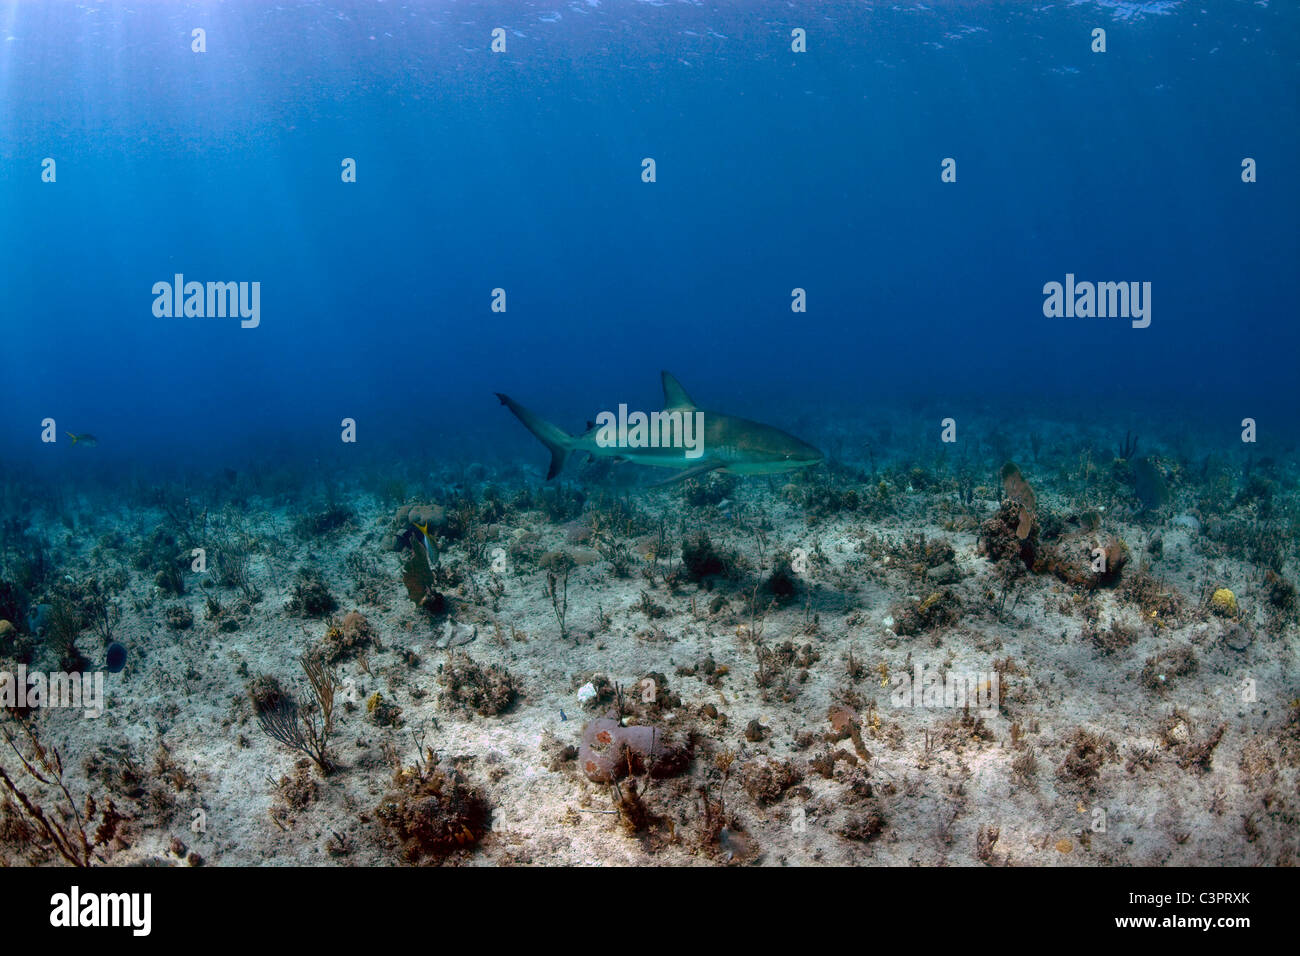 A Caribbean Reef Shark cruises above an unhealthy coral reef in Cuba. Stock Photo